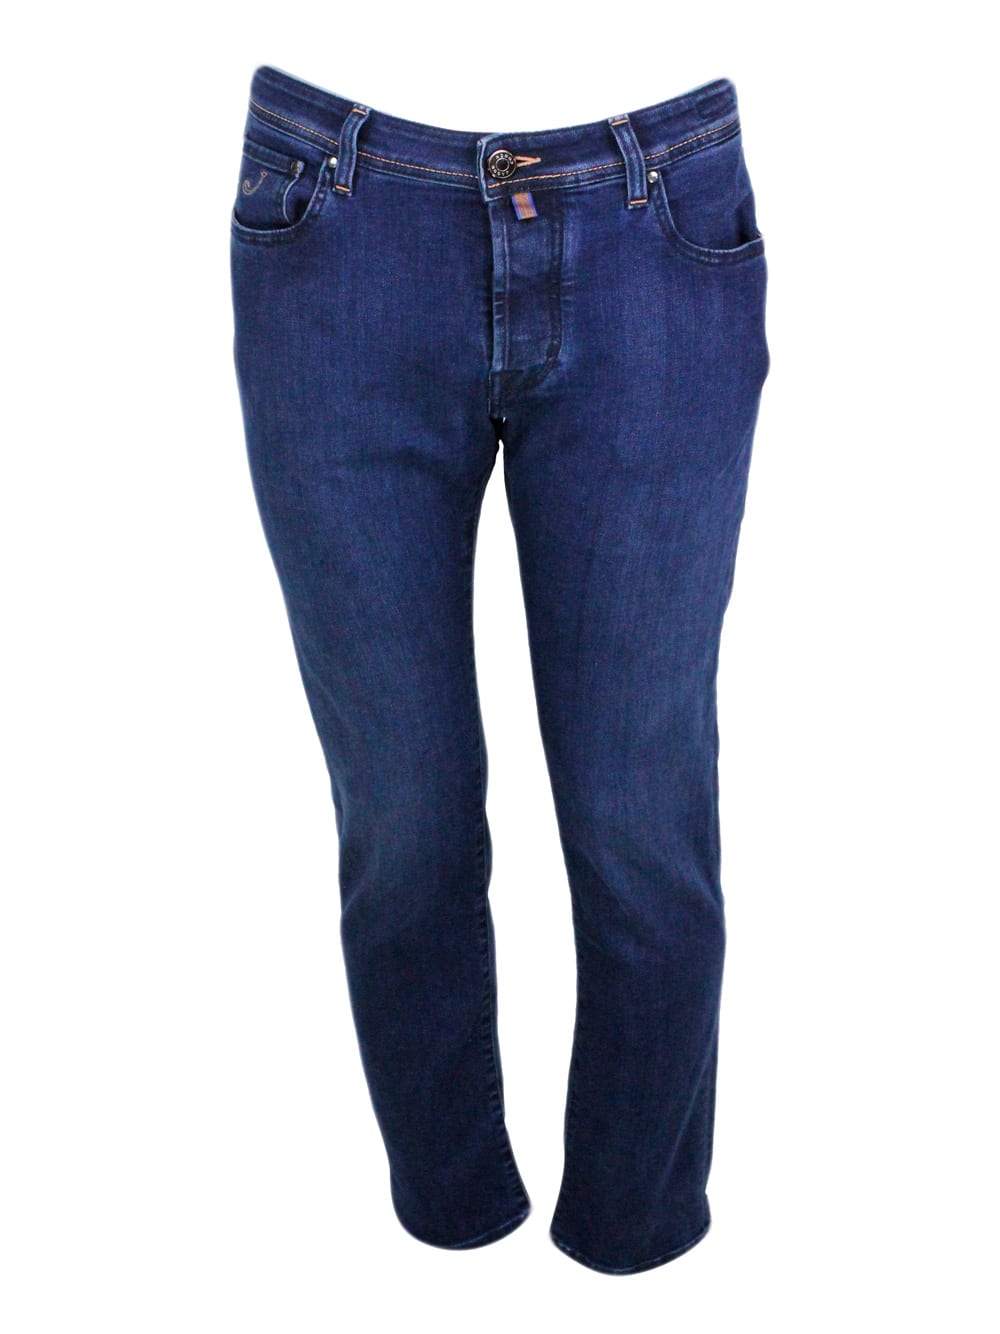 Shop Jacob Cohen Bard J688 Luxury Edition Denim Trousers In Soft Stretch Denim With 5 Pockets With Closure Buttons An